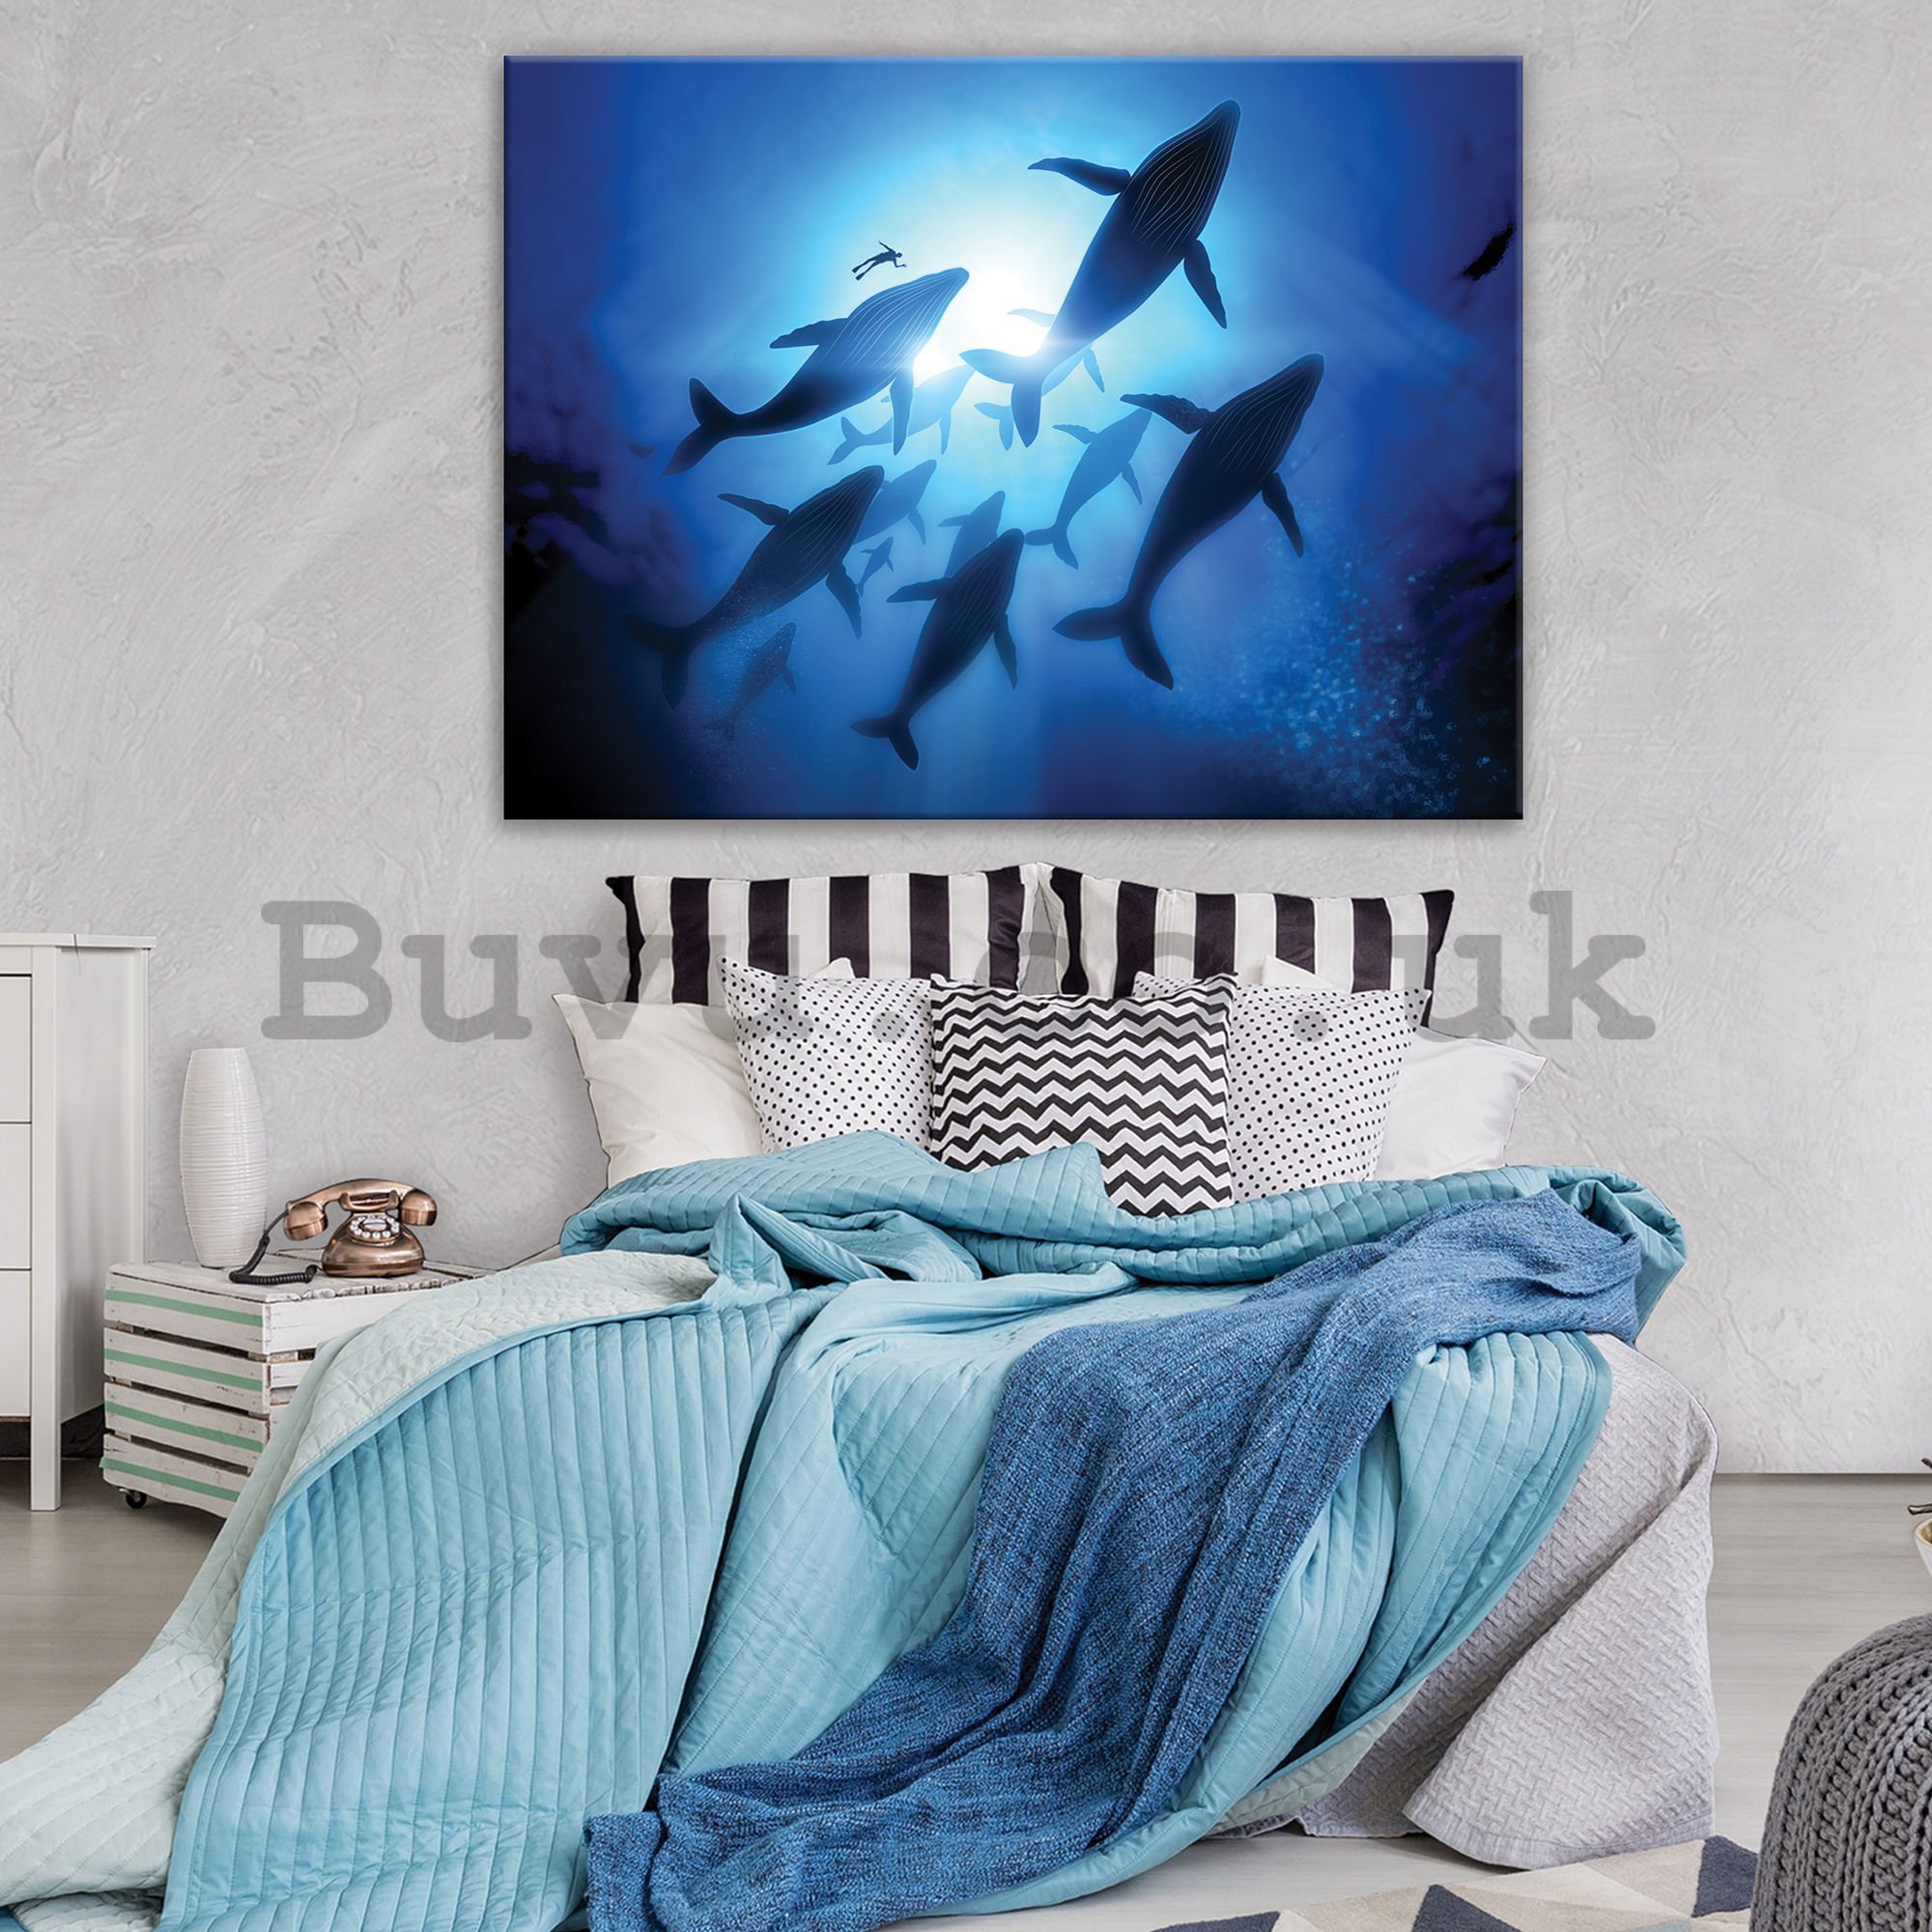 Painting on canvas: Whales (1) - 75x100 cm